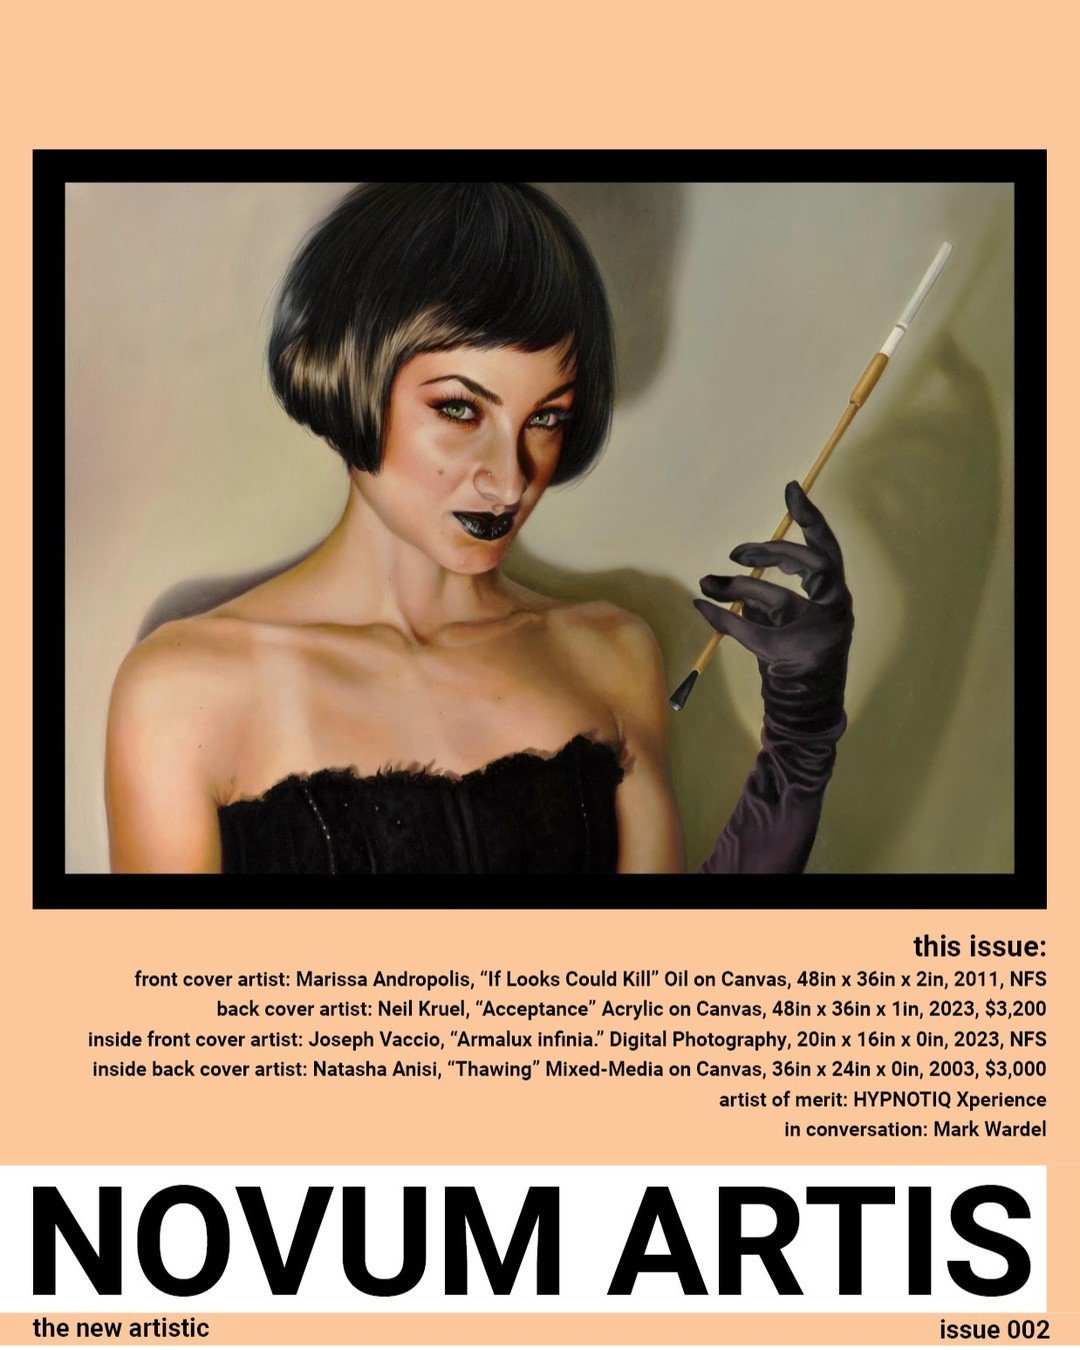 Novum Artis Issue 002 is now available, with over 75 amazing curated artists, plus Artist Of Merit @hypnotiqxperience and In Conversation with @mark_wardel . You order print copies -- remember this coupon code: 20APRIL which gets you 20% off now thro